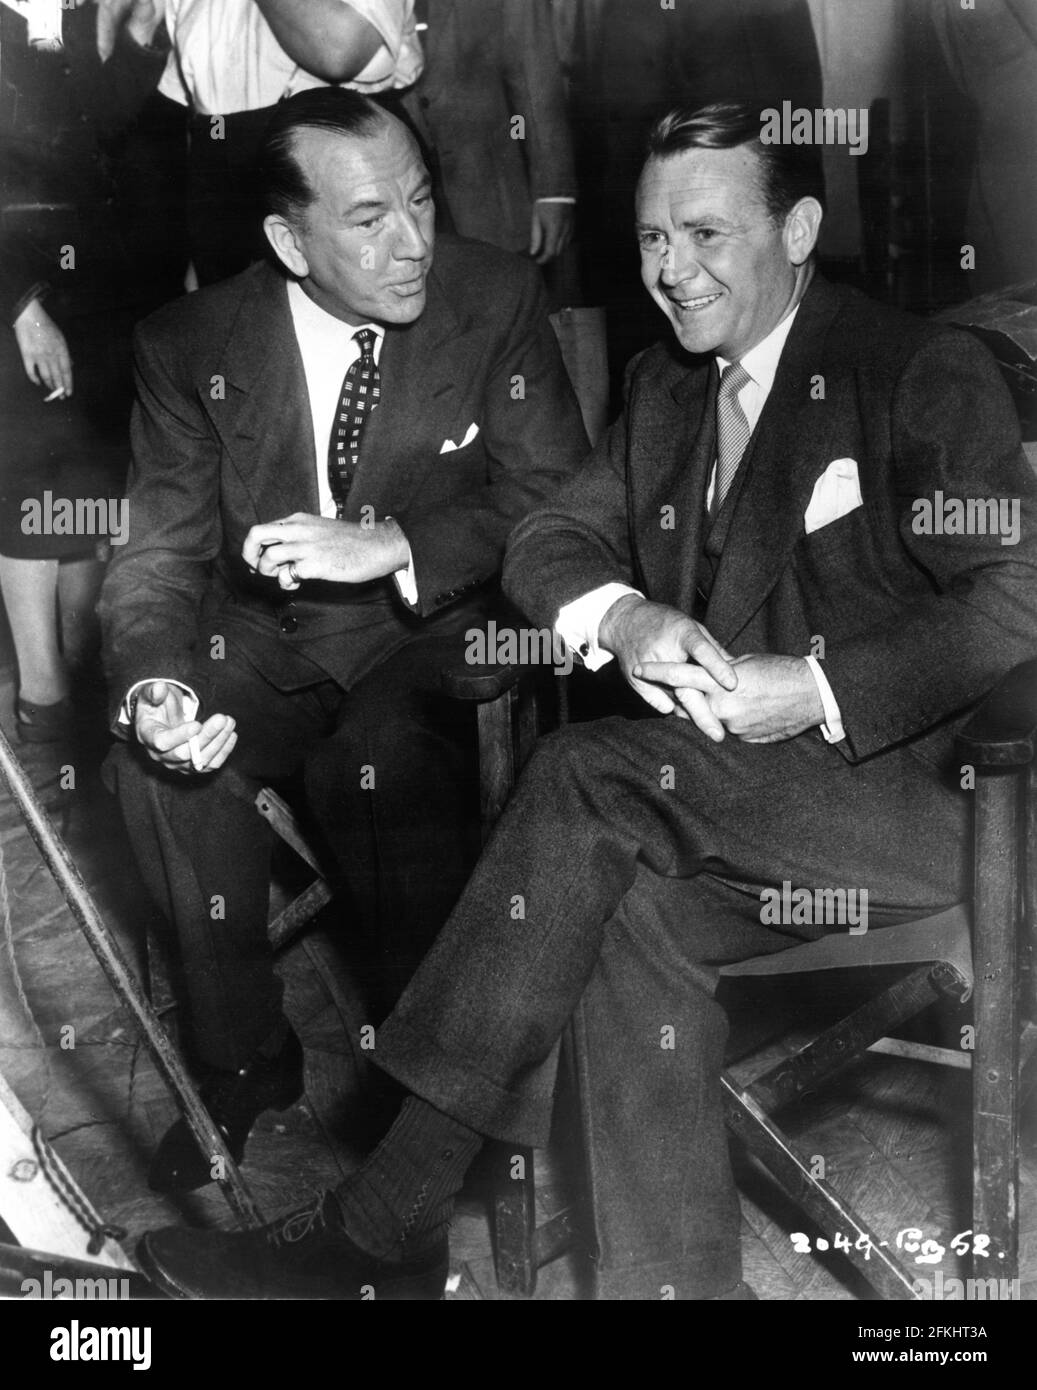 NOEL COWARD with Set Visitor JOHN MILLS on set candid during filming of THE ASTONISHED HEART 1950 directors ANTONY DARNBOROUGH and TERENCE FISHER play / screenplay Noel Coward Gainsborough Pictures / Sydney Box Productions / General Film Distributors (GFD) Stock Photo